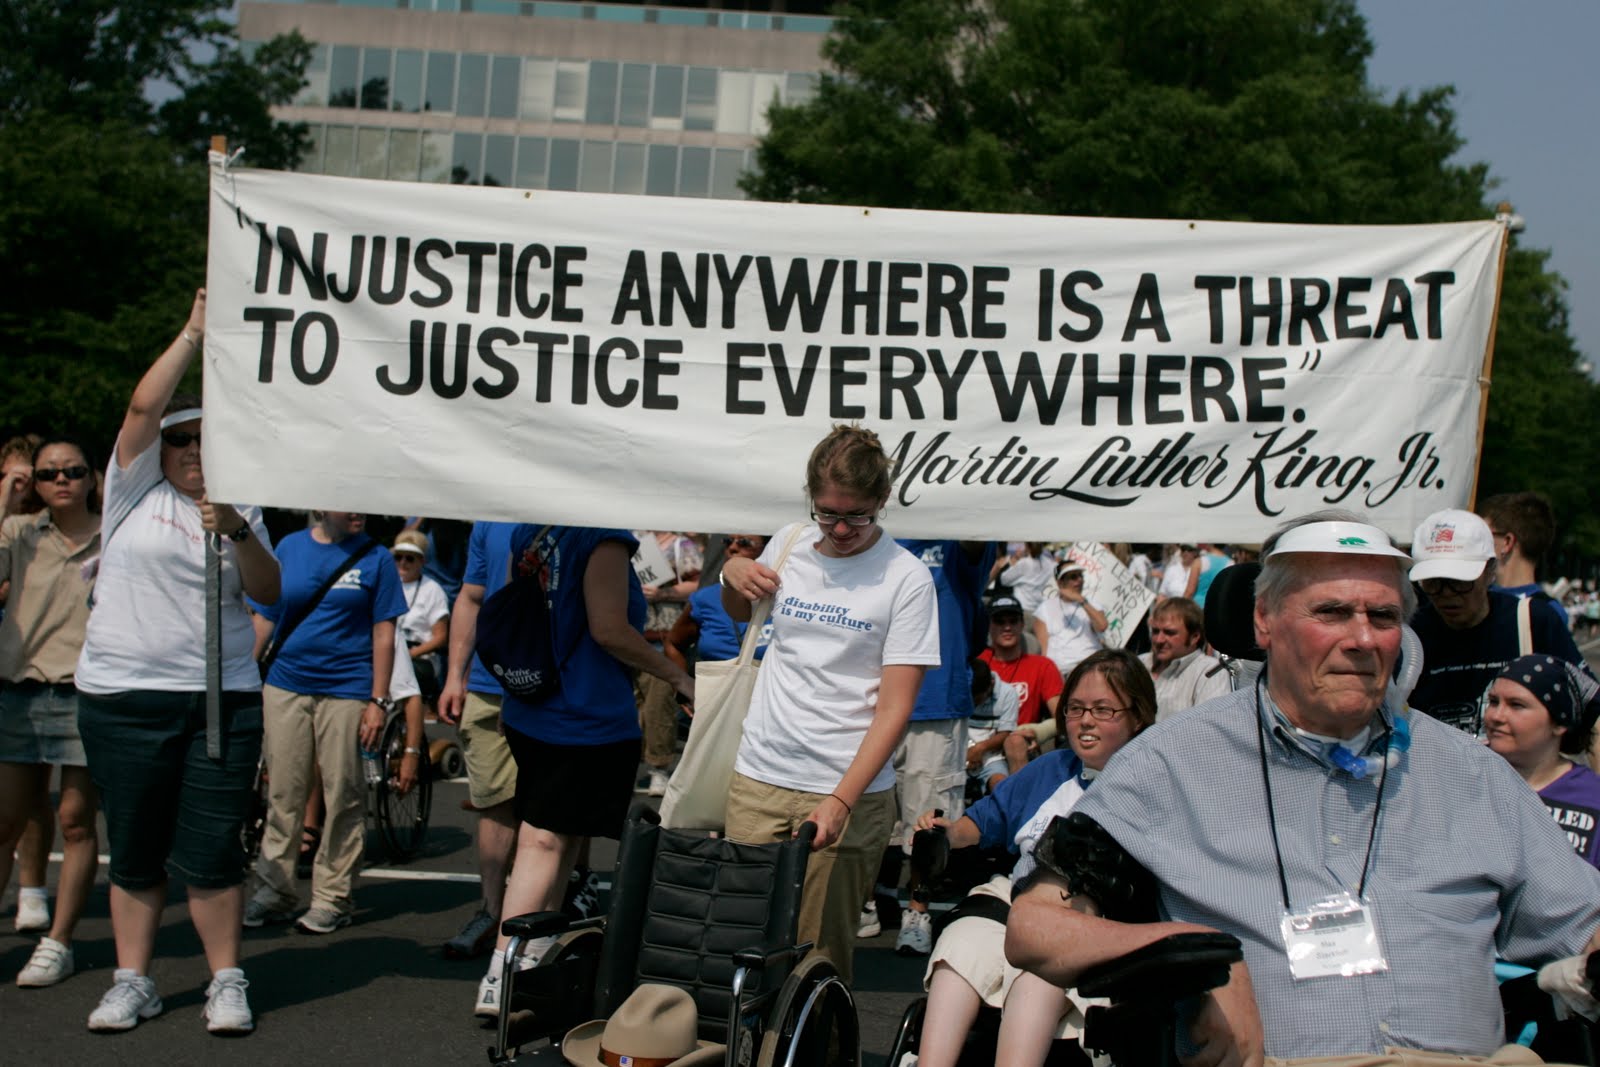 examples of injustice in the world today